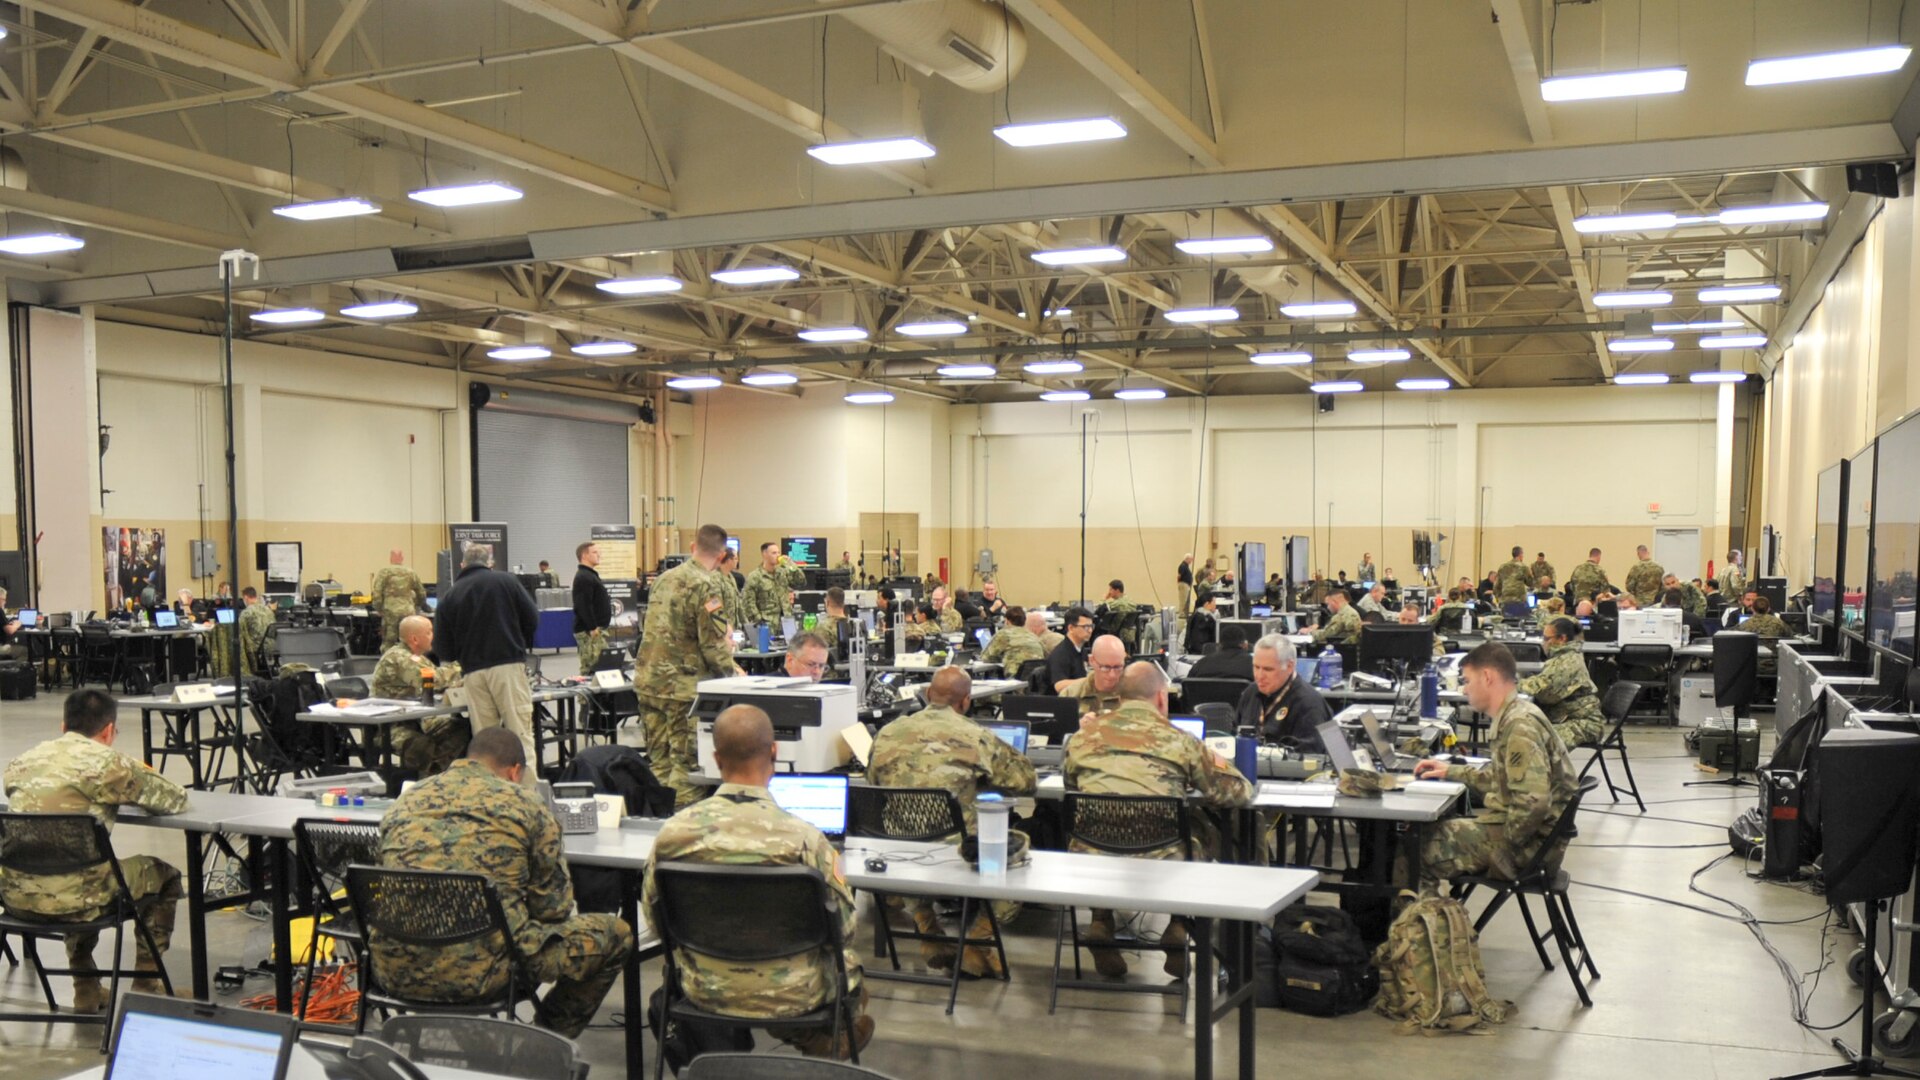 The Joint Task Force Civil Support (JTF-CS) Joint Operations Center during Exercise Sudden Response 19 in Fayetteville, N.C., on January 26, 2019. The week-long exercise is a critical training component for JTF-CS and various other units within JTF-CS, which deploys in response to nuclear disasters in the U.S. (Official DoD photo by Staff. Sgt. Jeramy Moore/released)